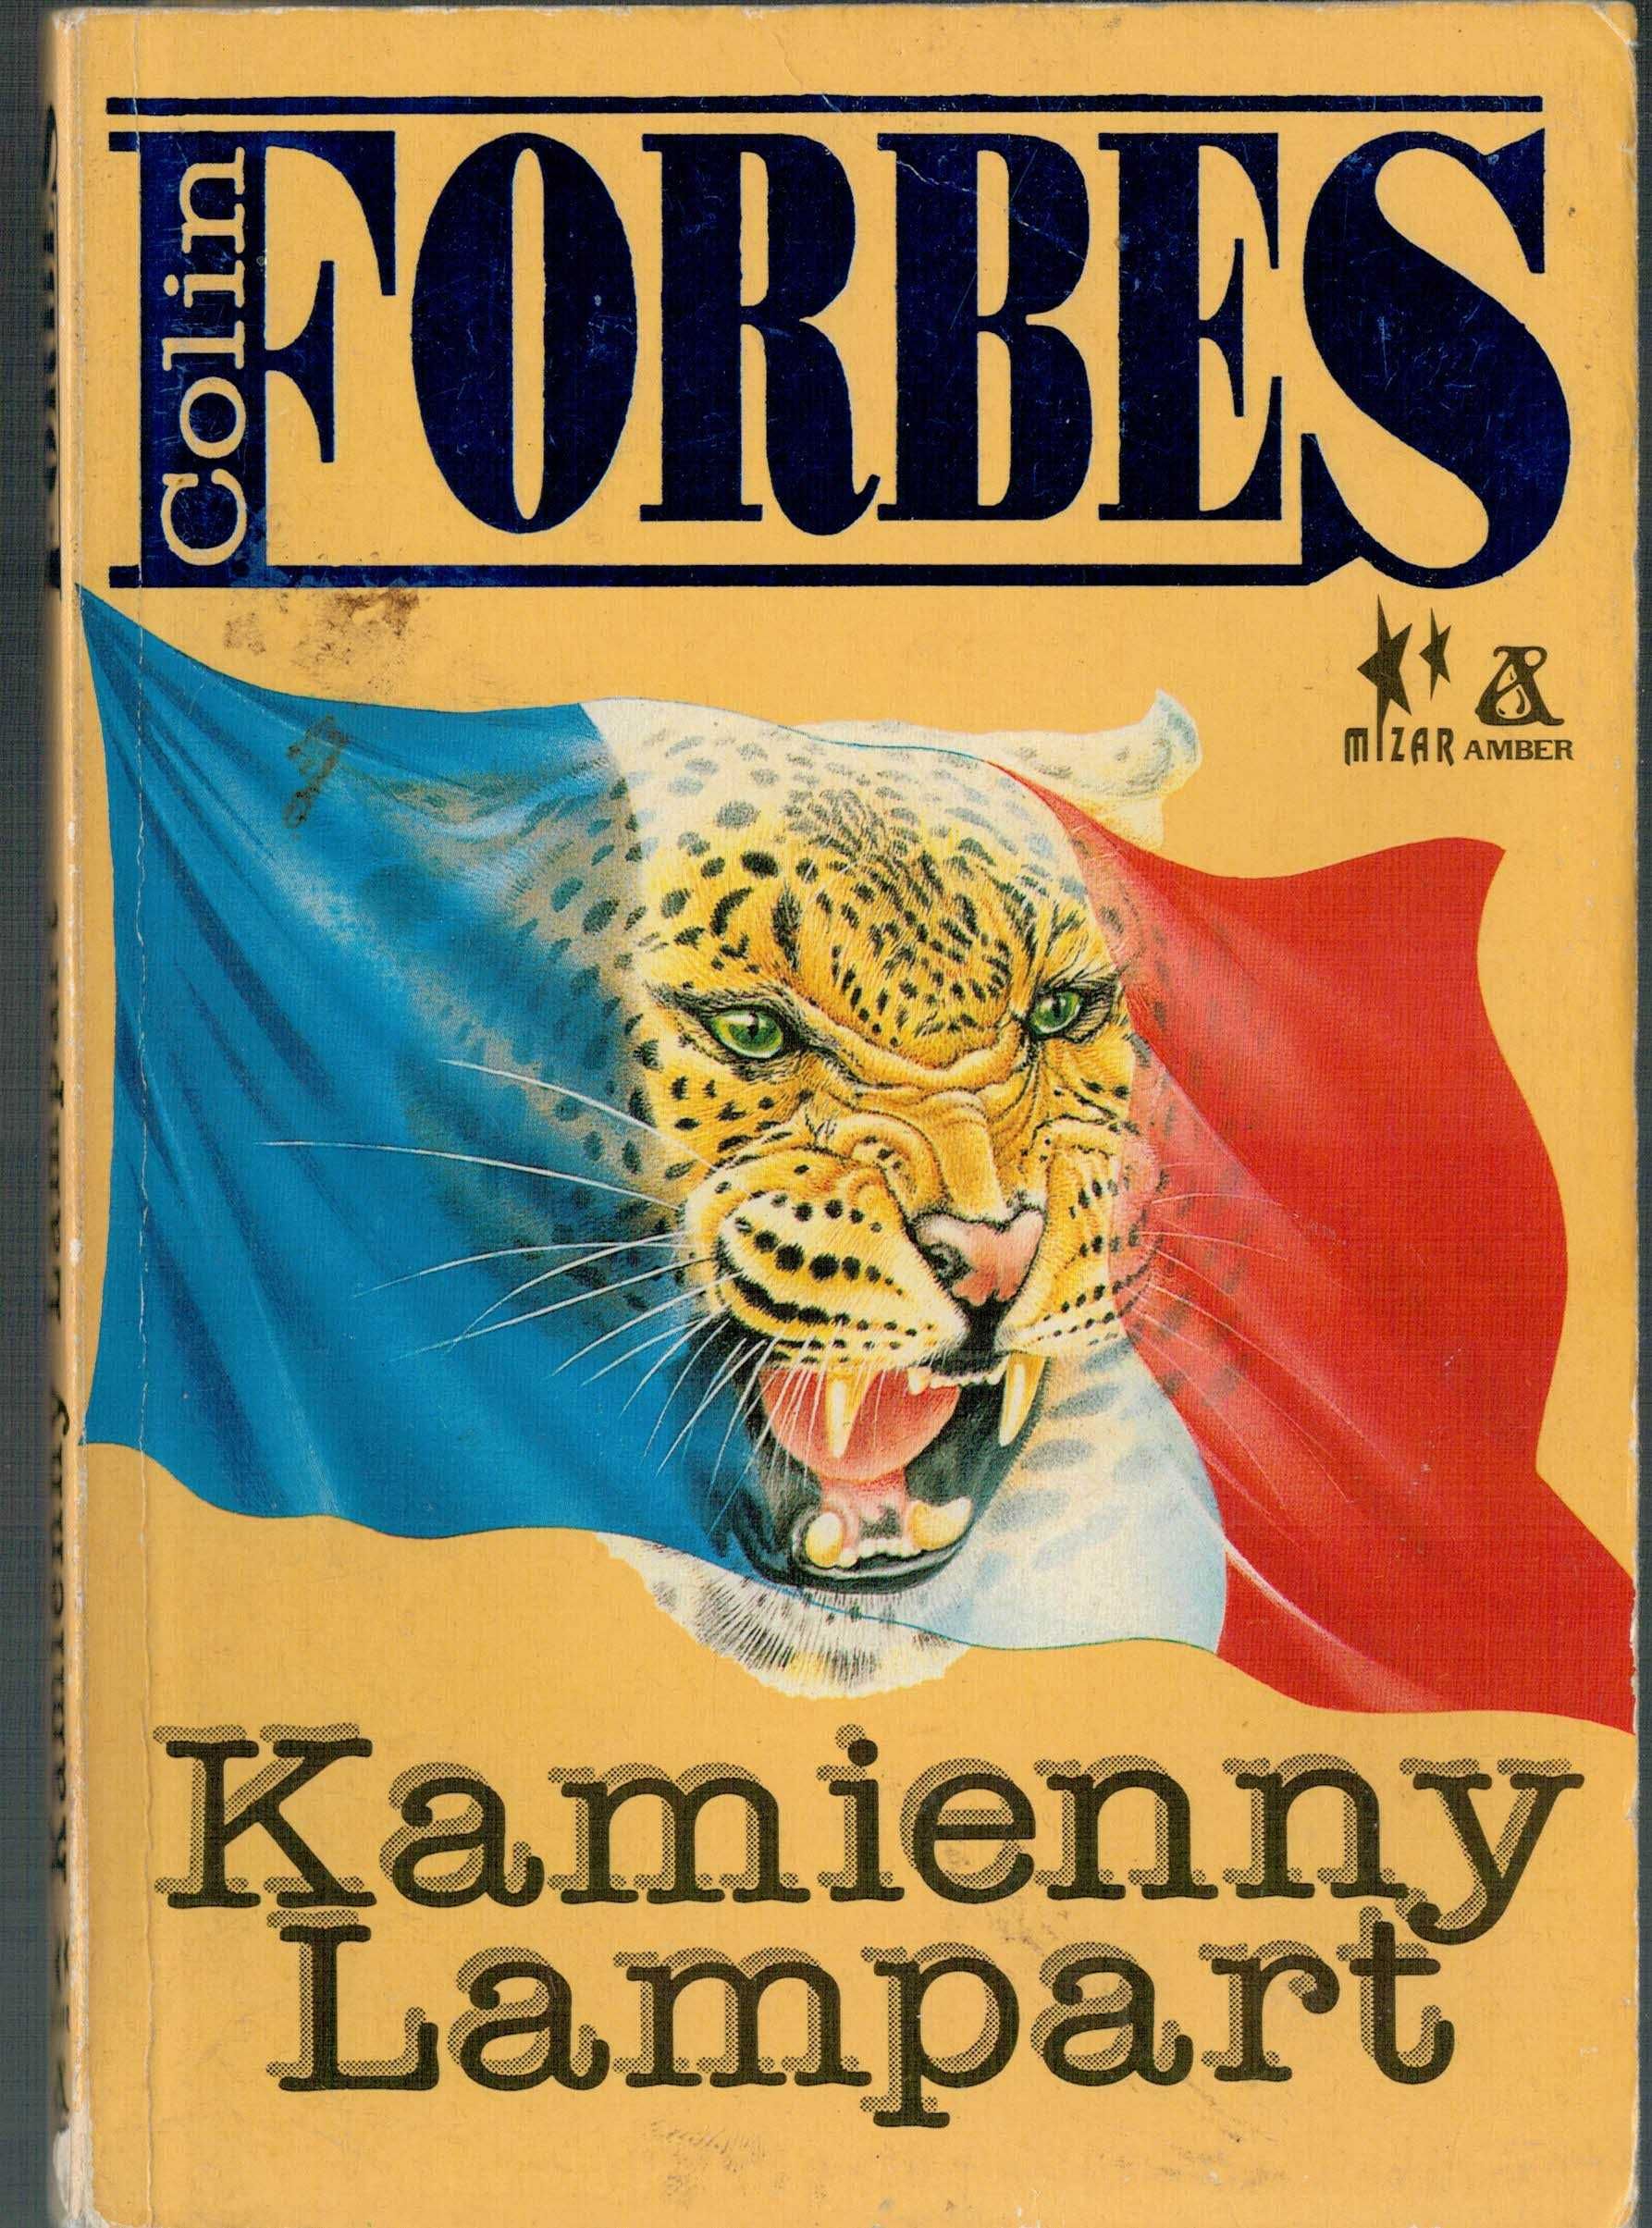 C. Forbes - Kamienny Lampart